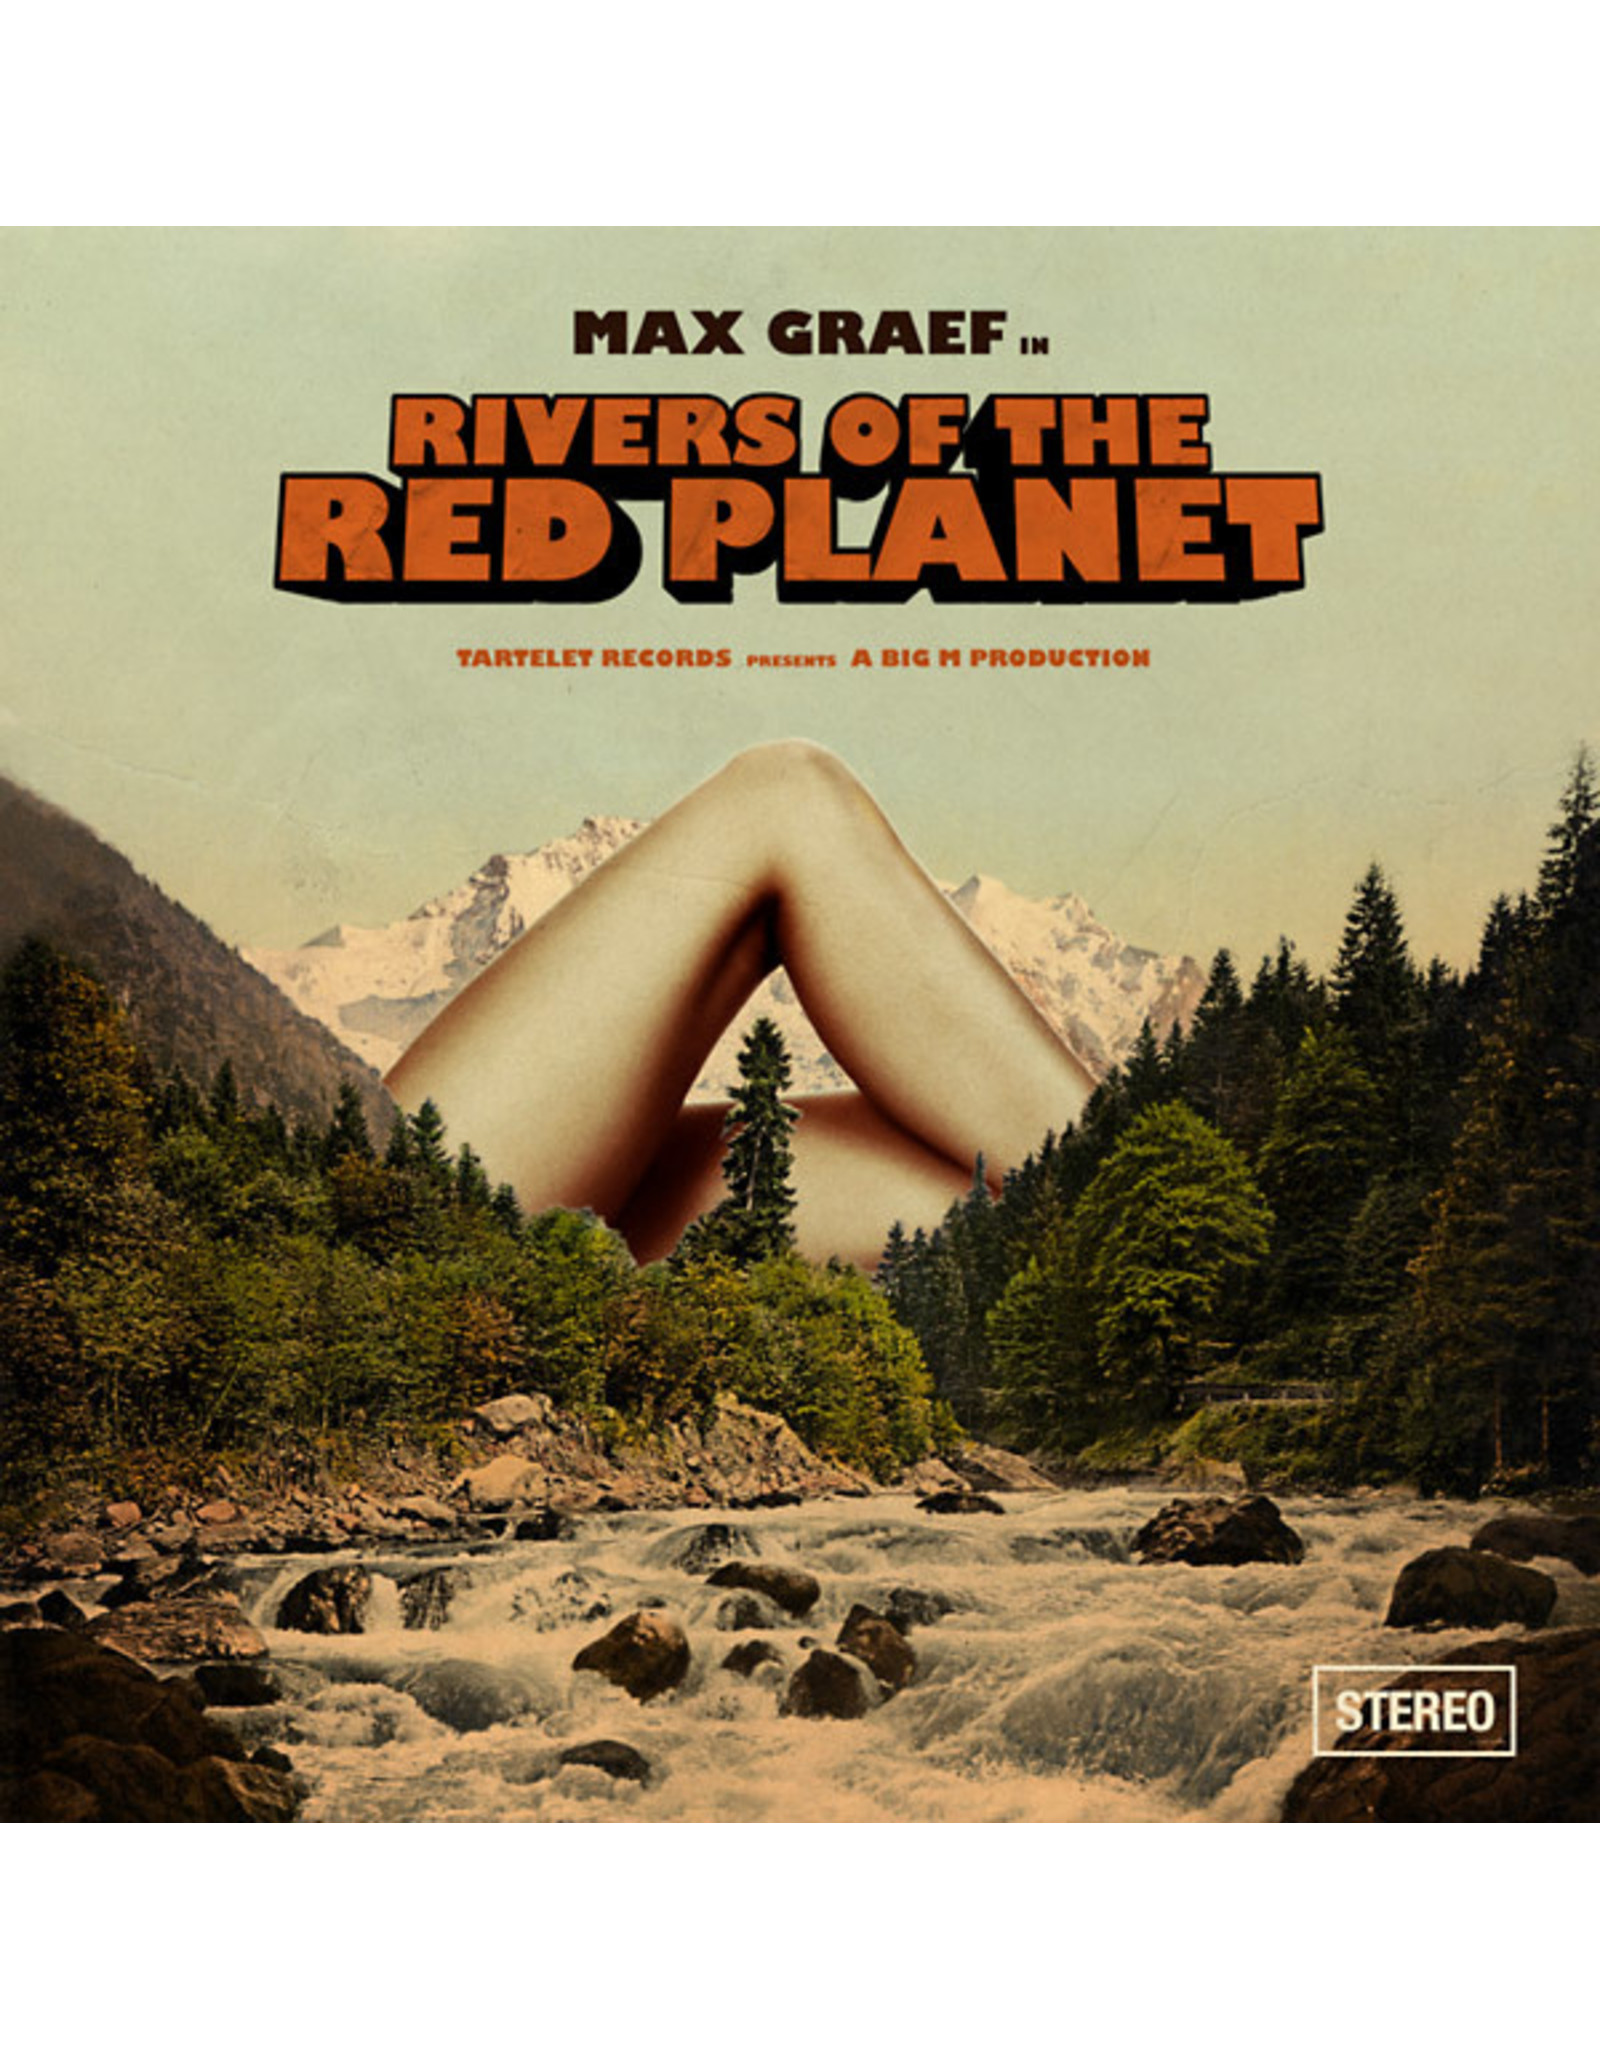 New Vinyl Max Graef - Rivers Of The Red Planet 2x12"